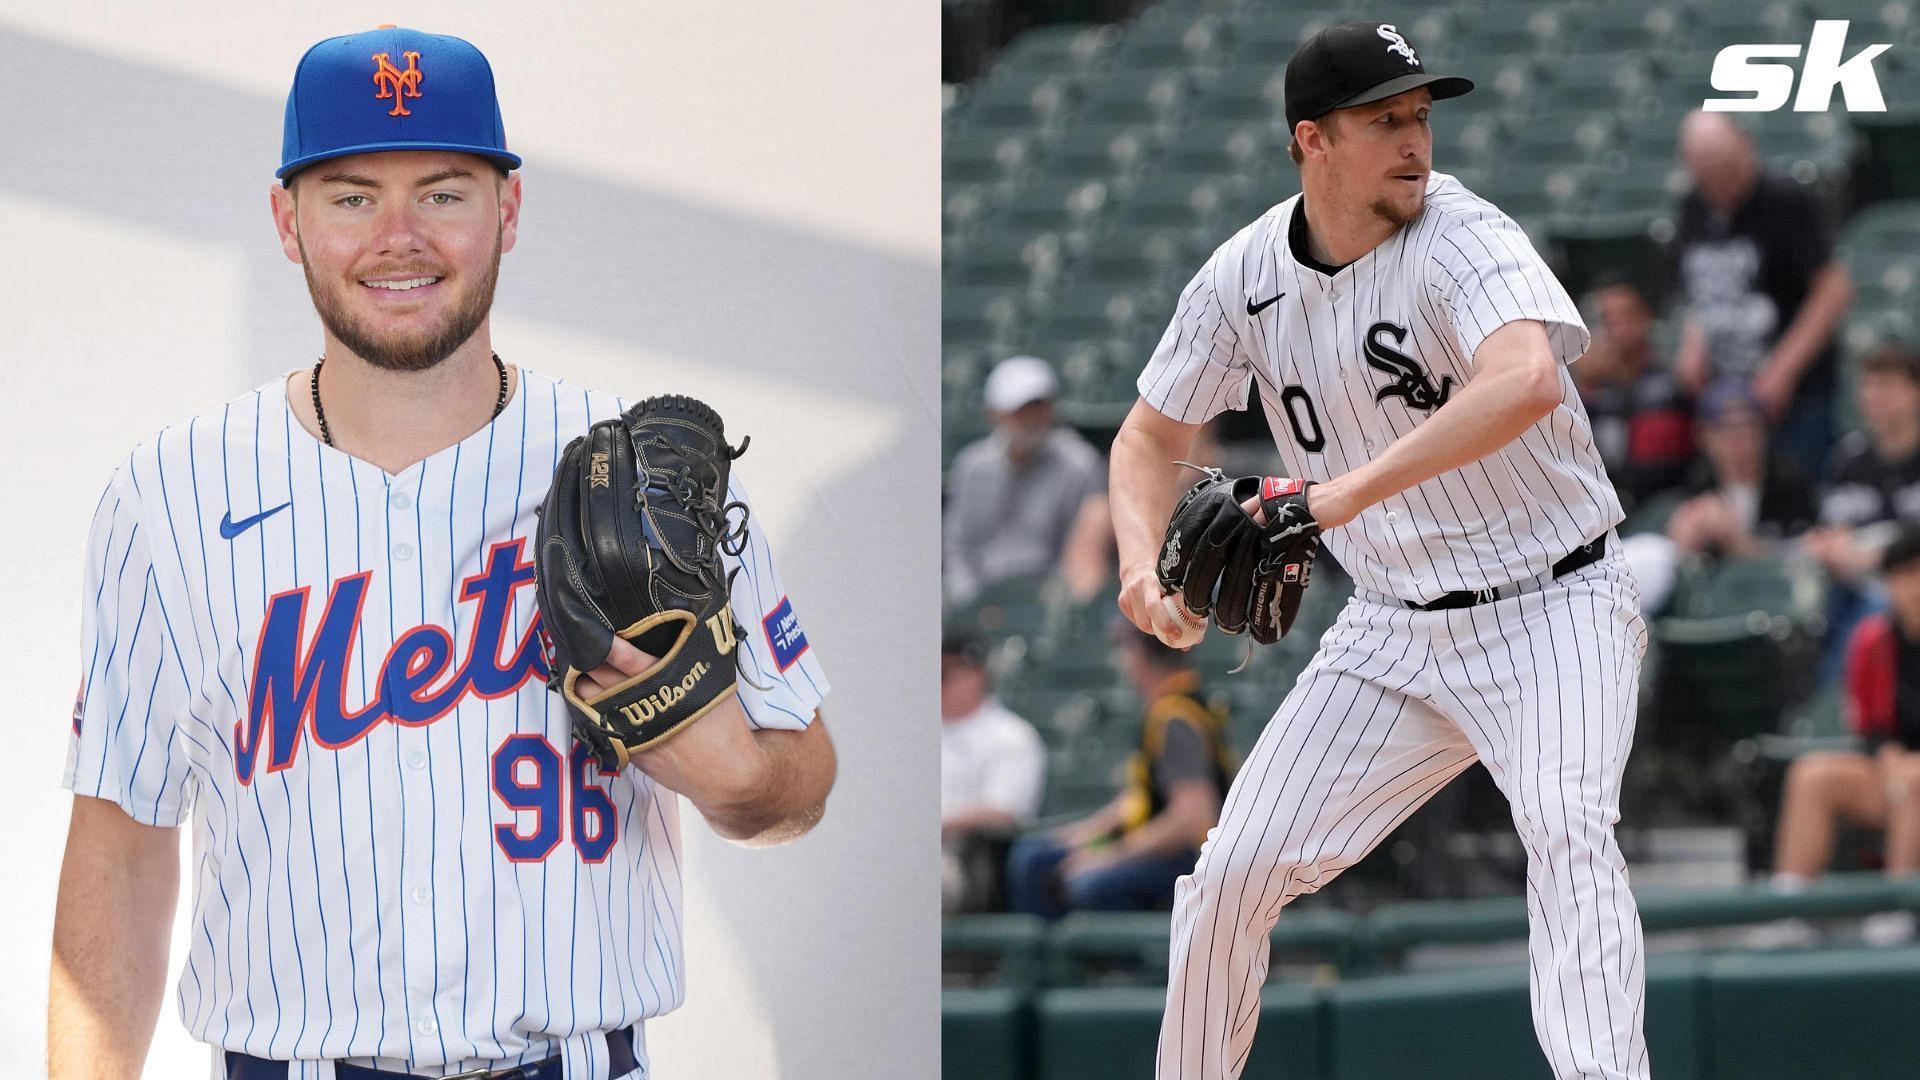 Christian Scott and Erick Fedde are two intriguing replacements for Nathan Eovaldi in fantasy baseball leagues